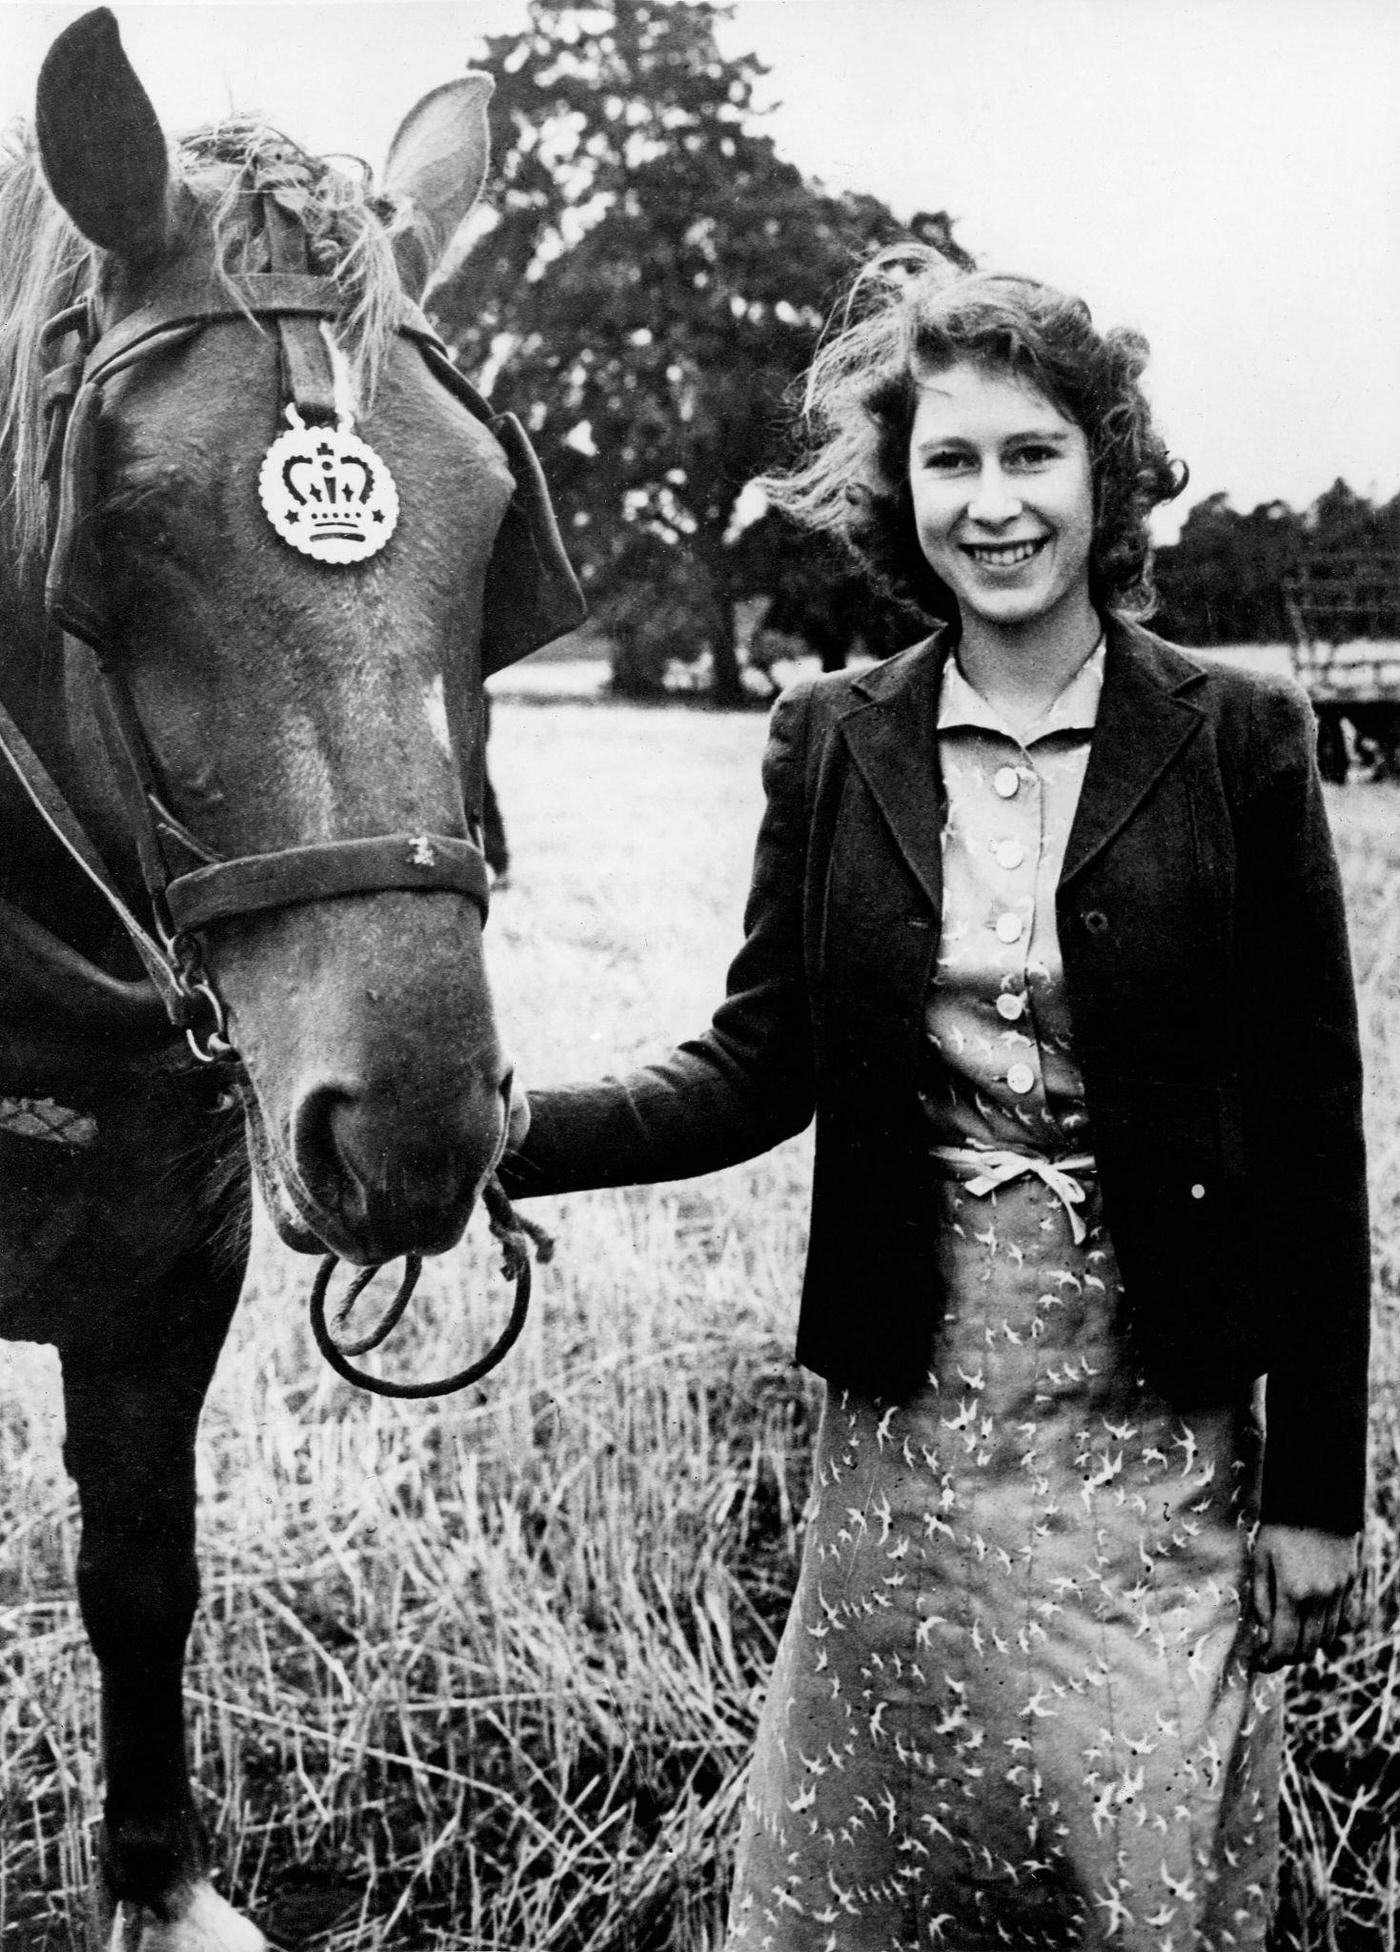 Princess Elizabeth (the future Queen Elizabeth II) at Sandringham with one of the horses, undated.